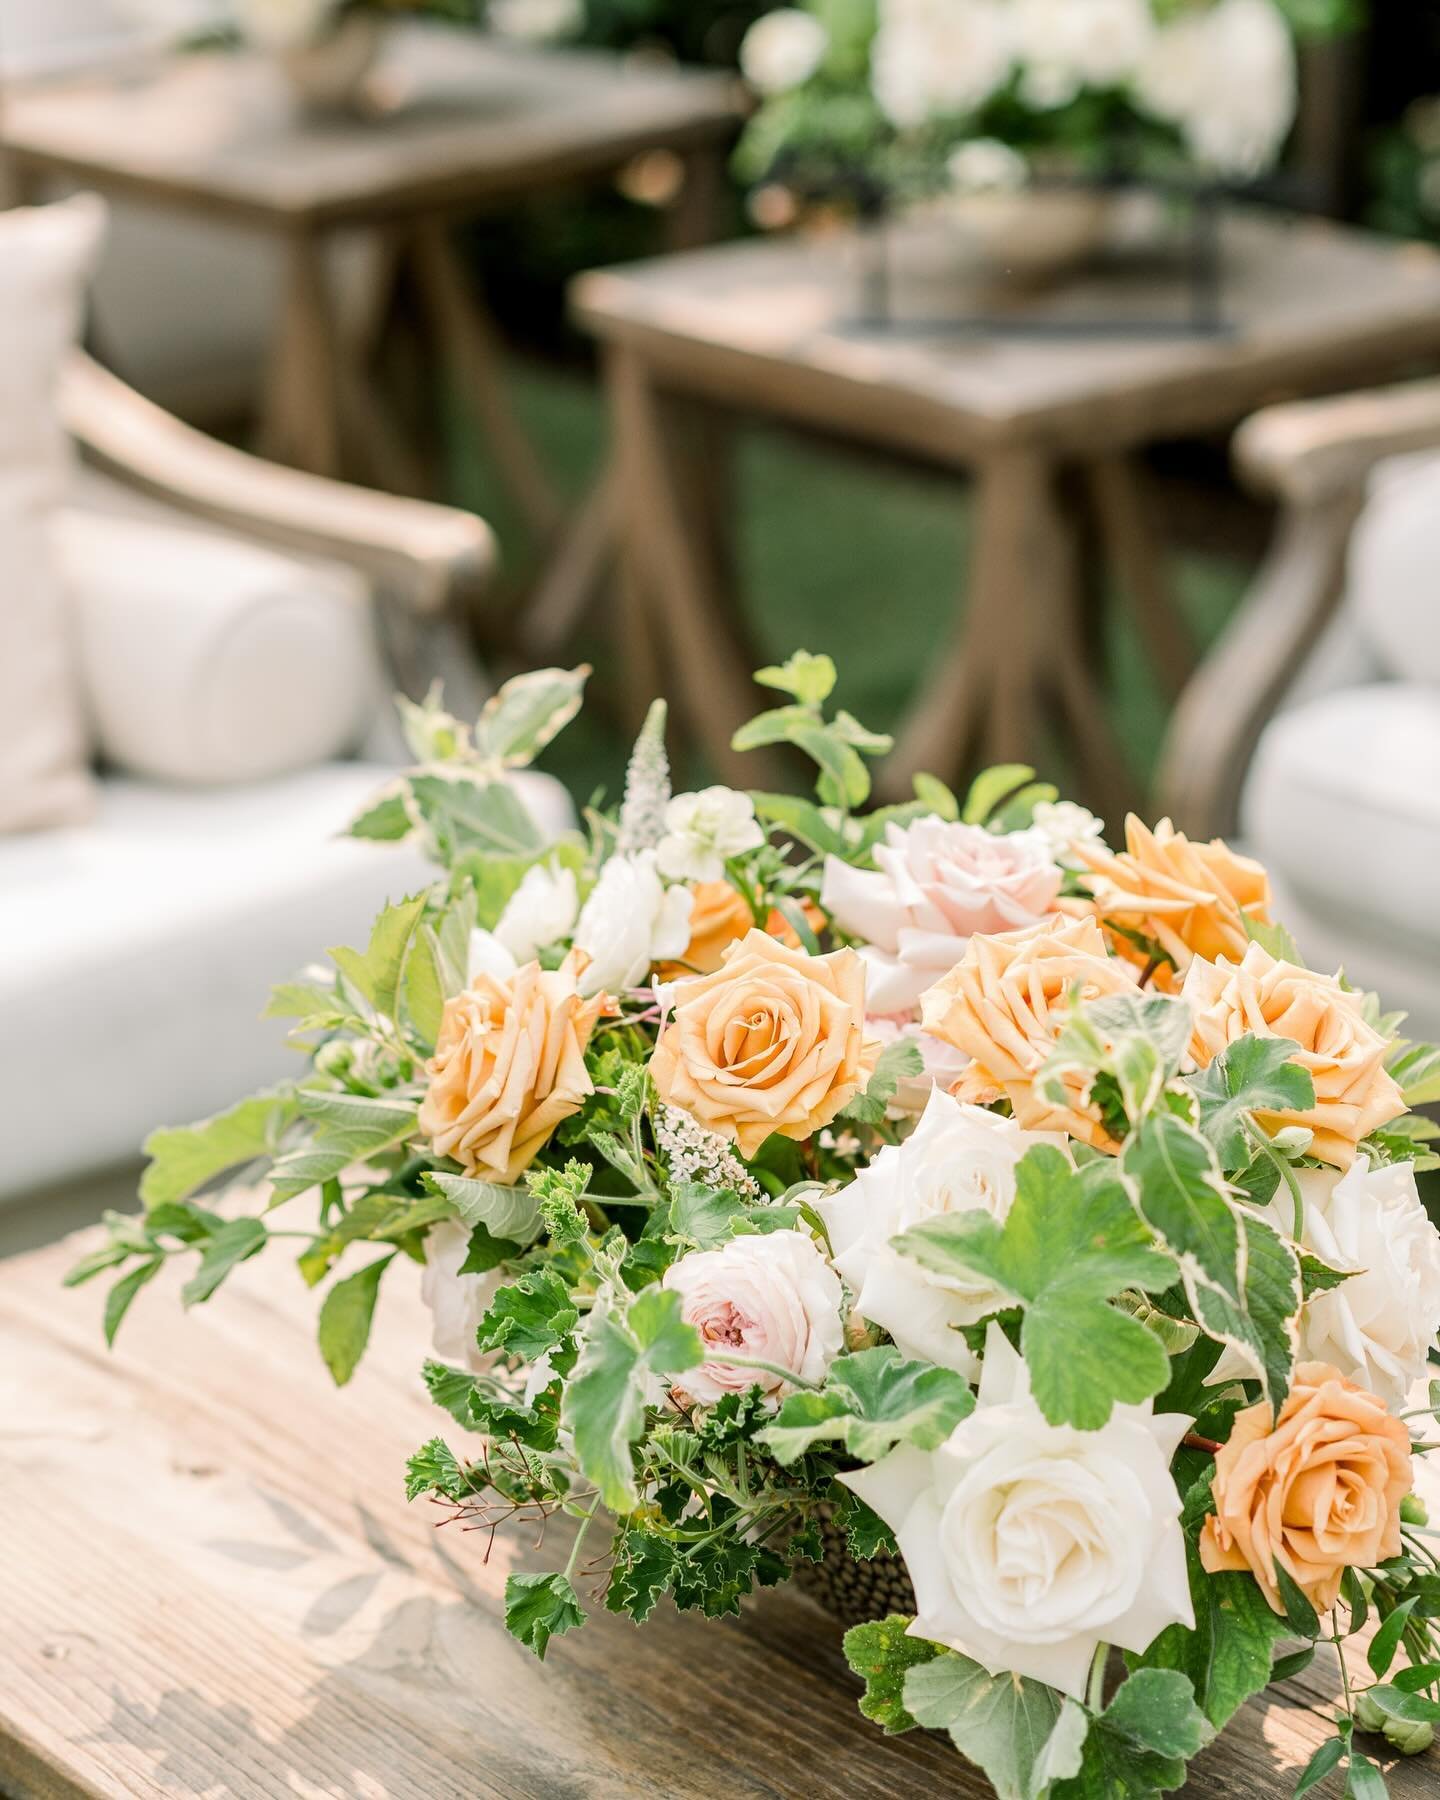 Love a good lounge moment and florals by @sarahsgardendesign 
.
.
.
With @pleasantonrentals 
@longmeadowranch 
Photo @caitlinoreillyphotography 
#napavalley